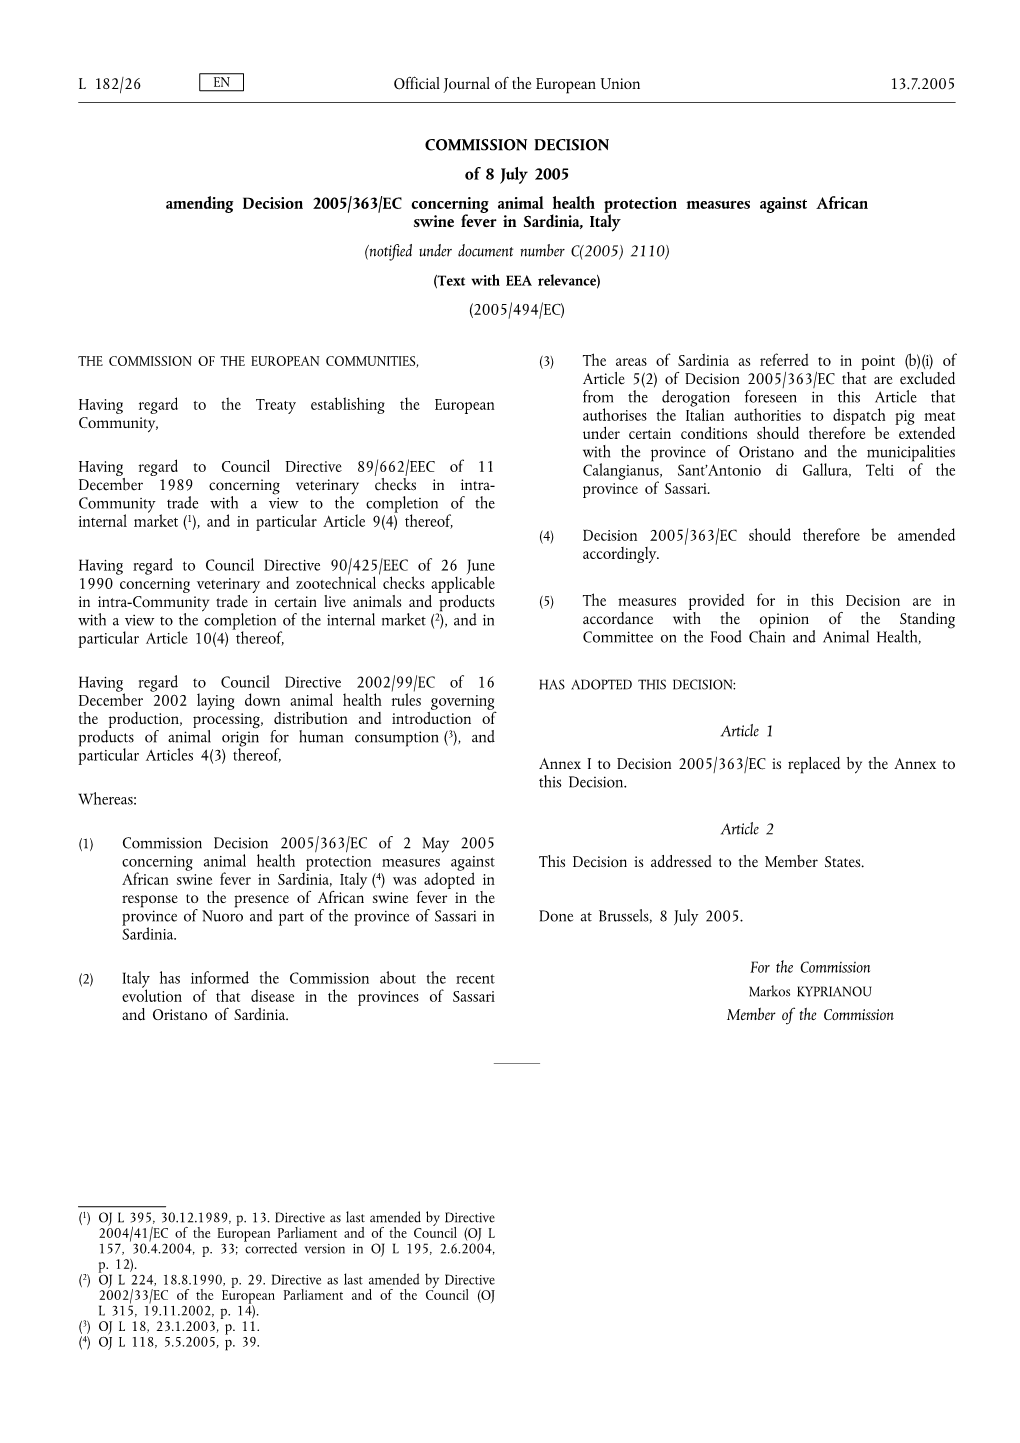 COMMISSION DECISION of 8 July 2005 Amending Decision 2005/363